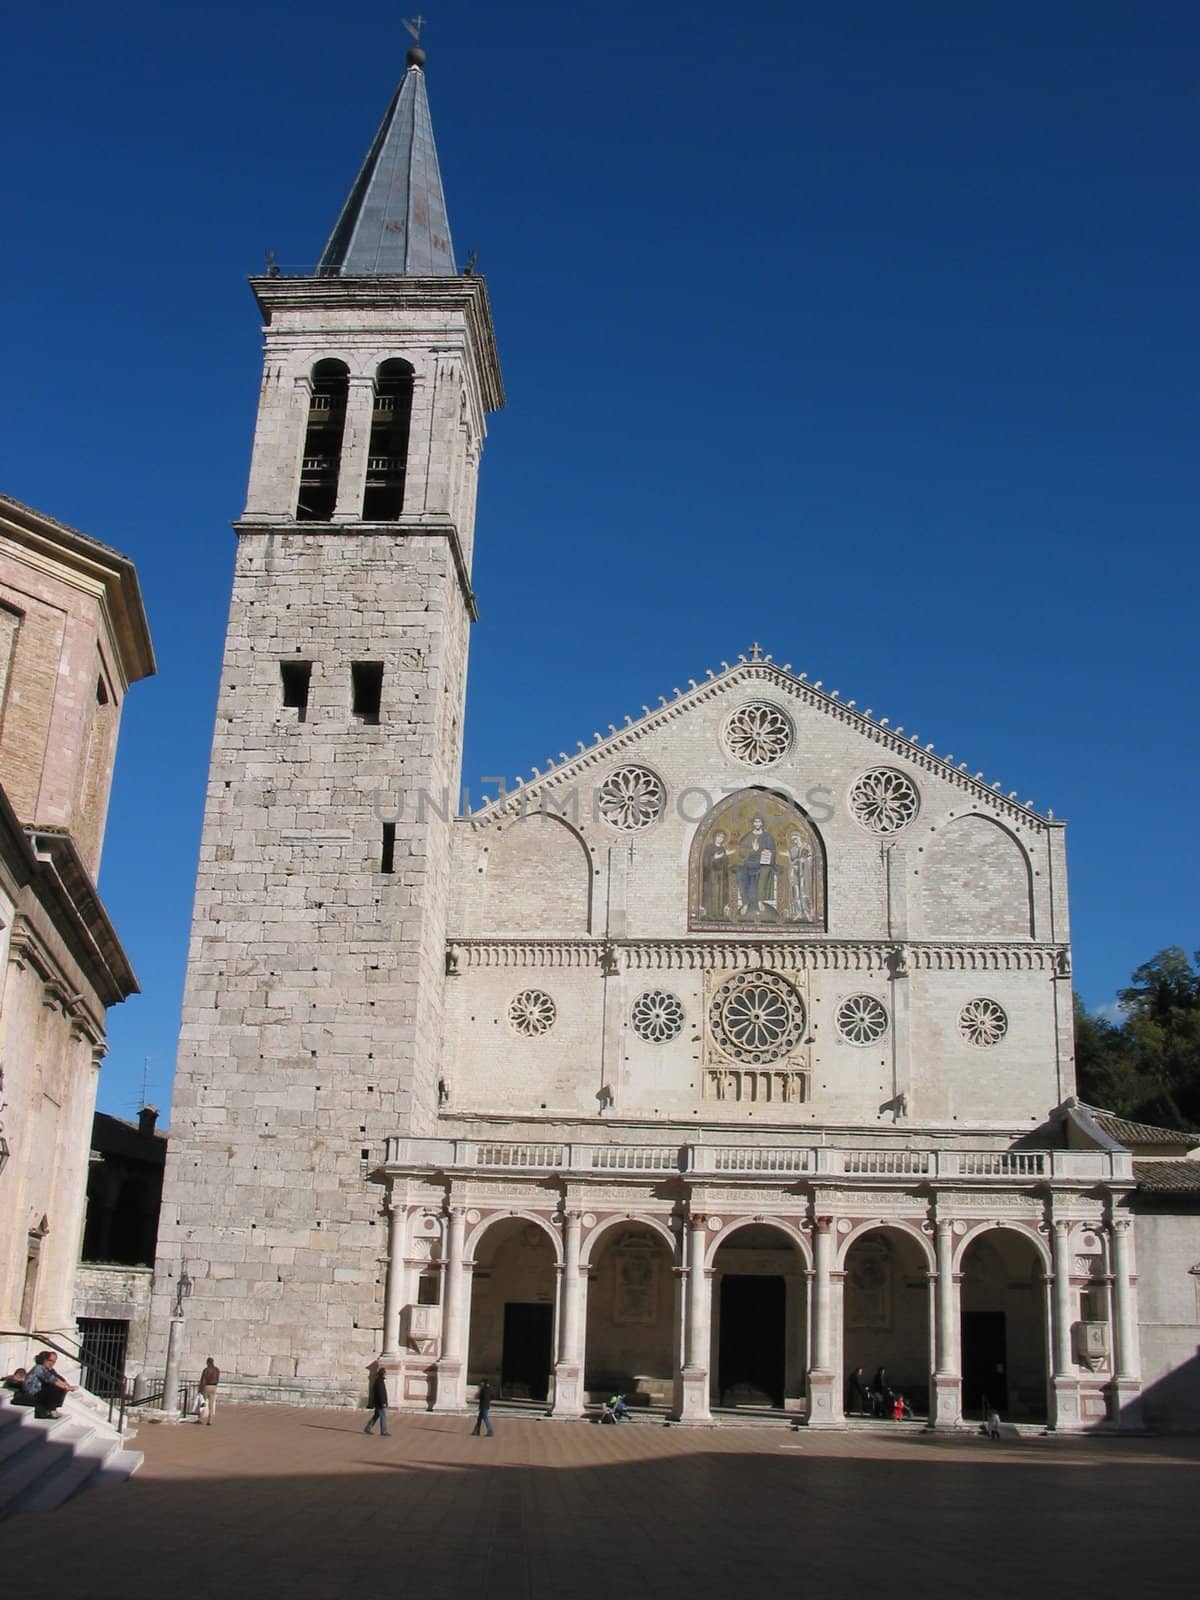 SPOLETO IS AN HISTORICAL ITALIAN TOWN FOUNDED BY THE ROMANS